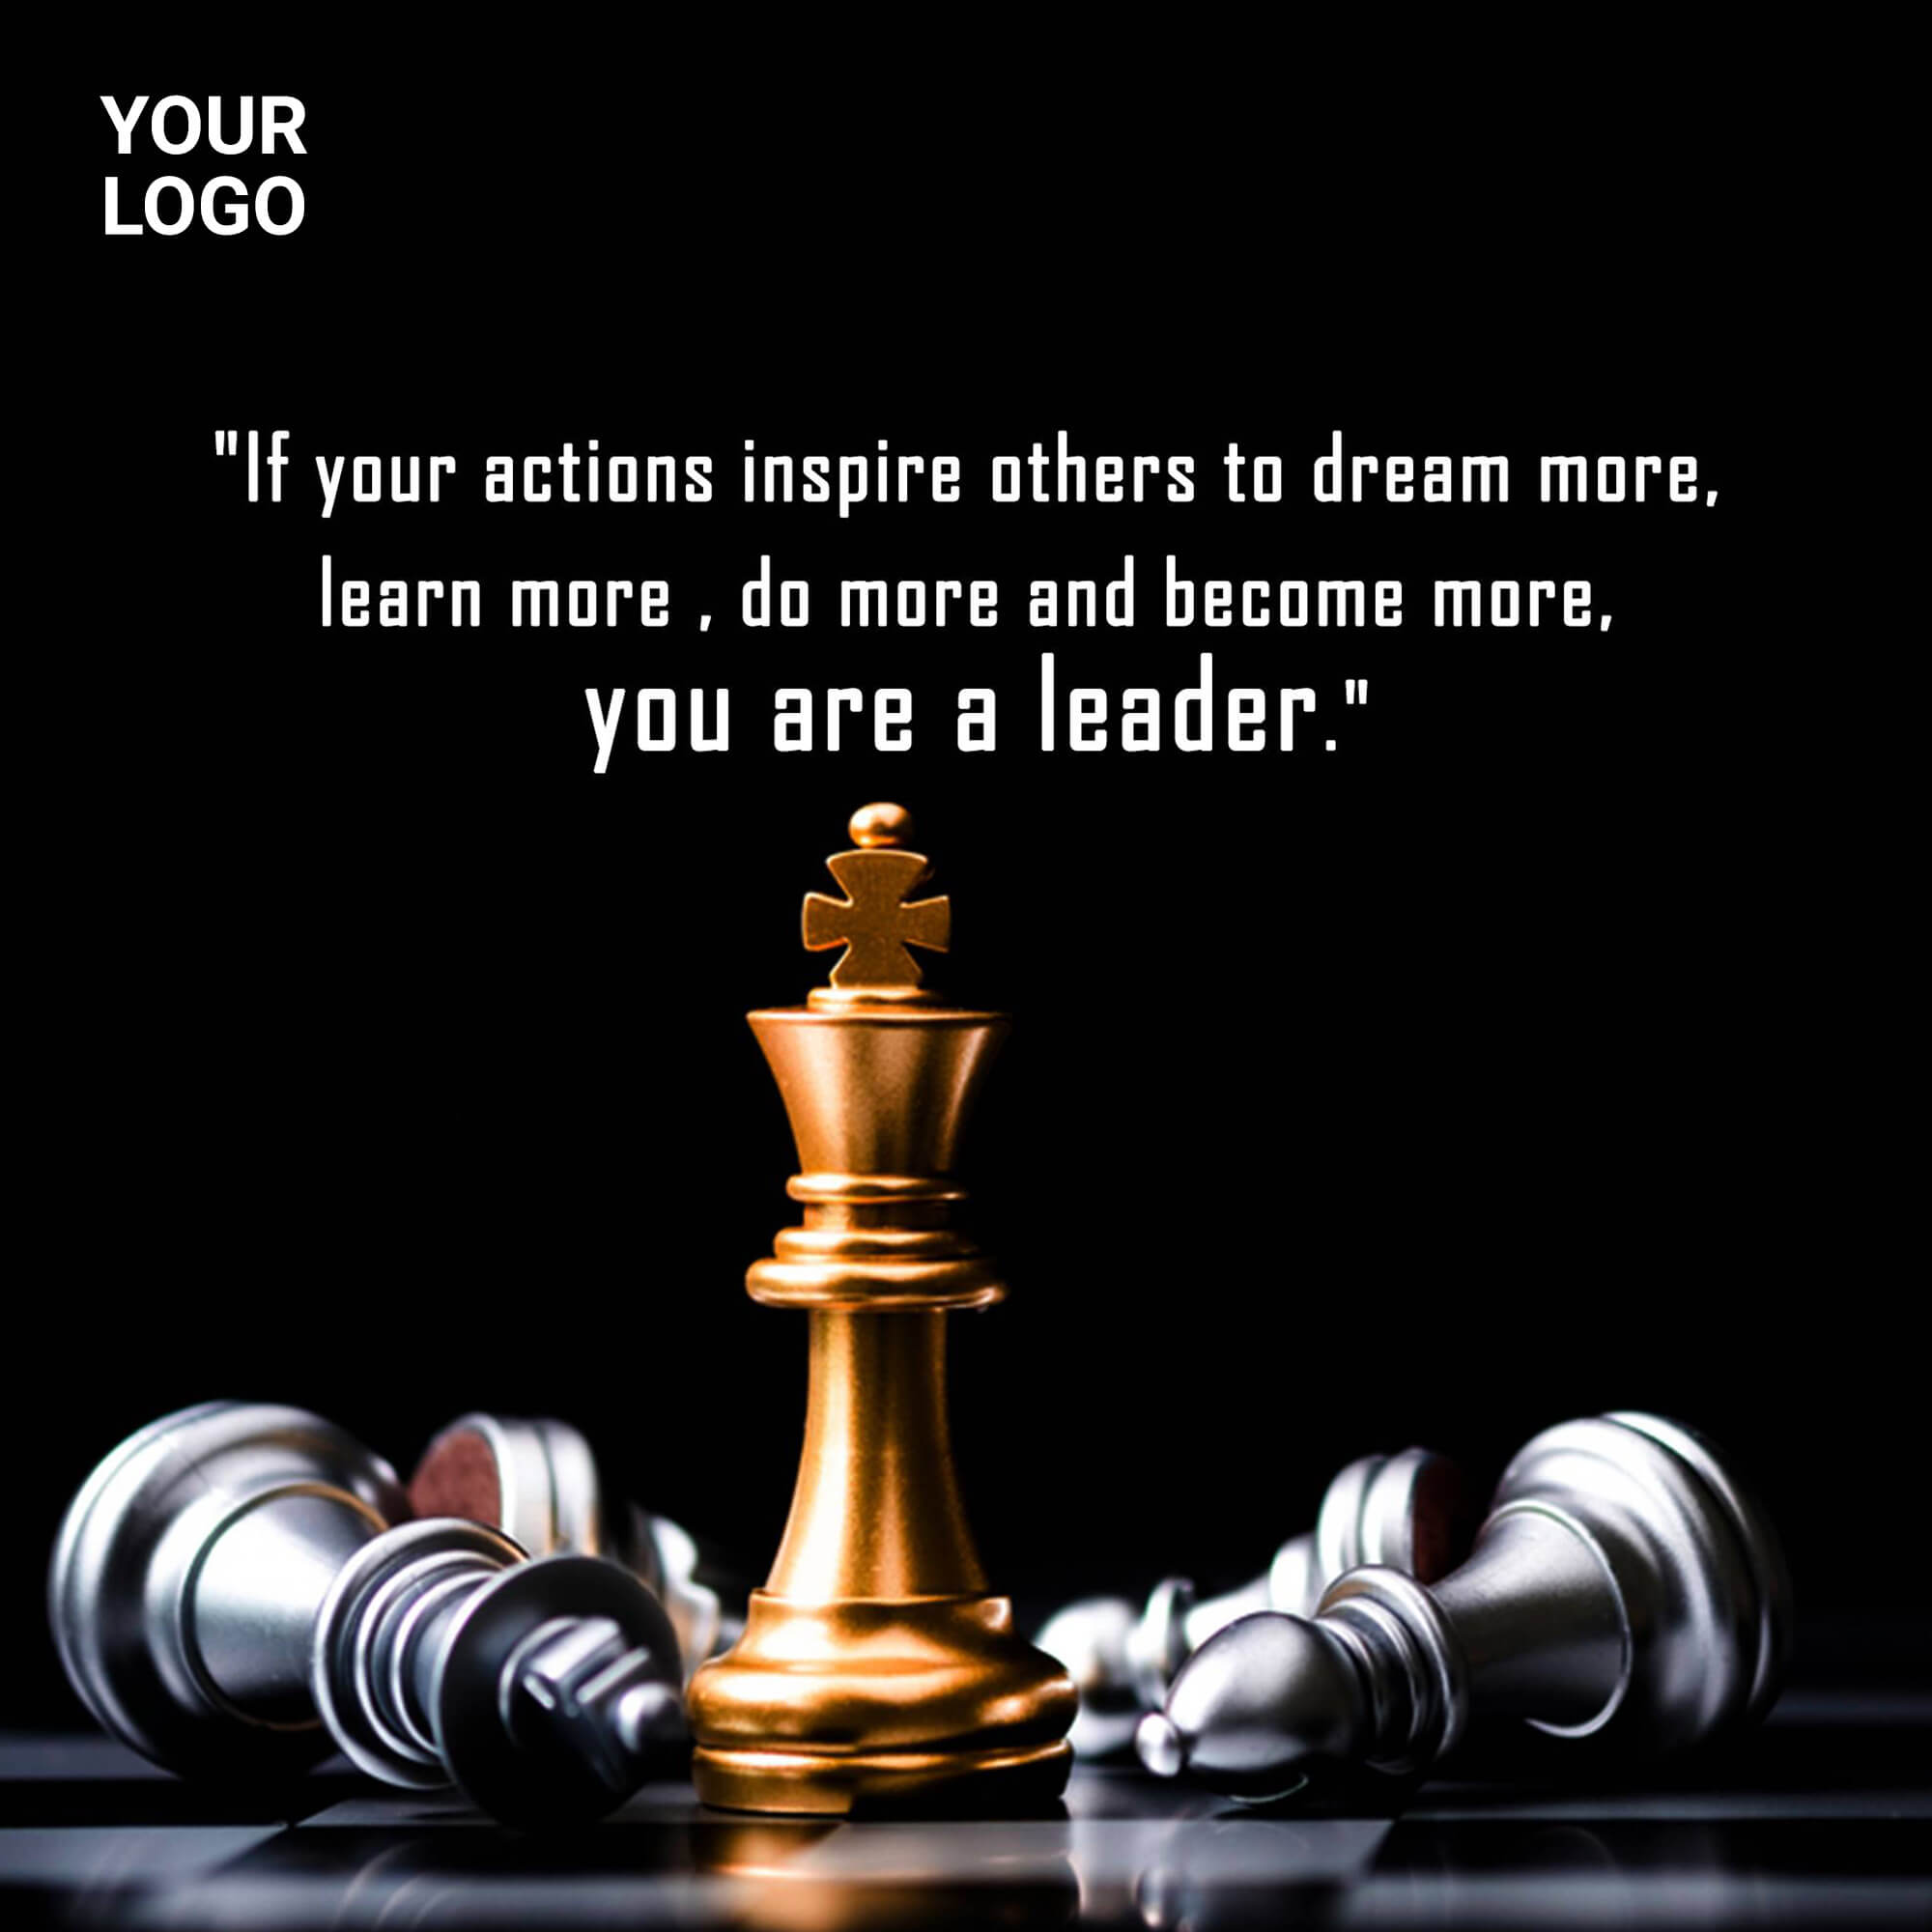 Leaders Quotes Banner Maker